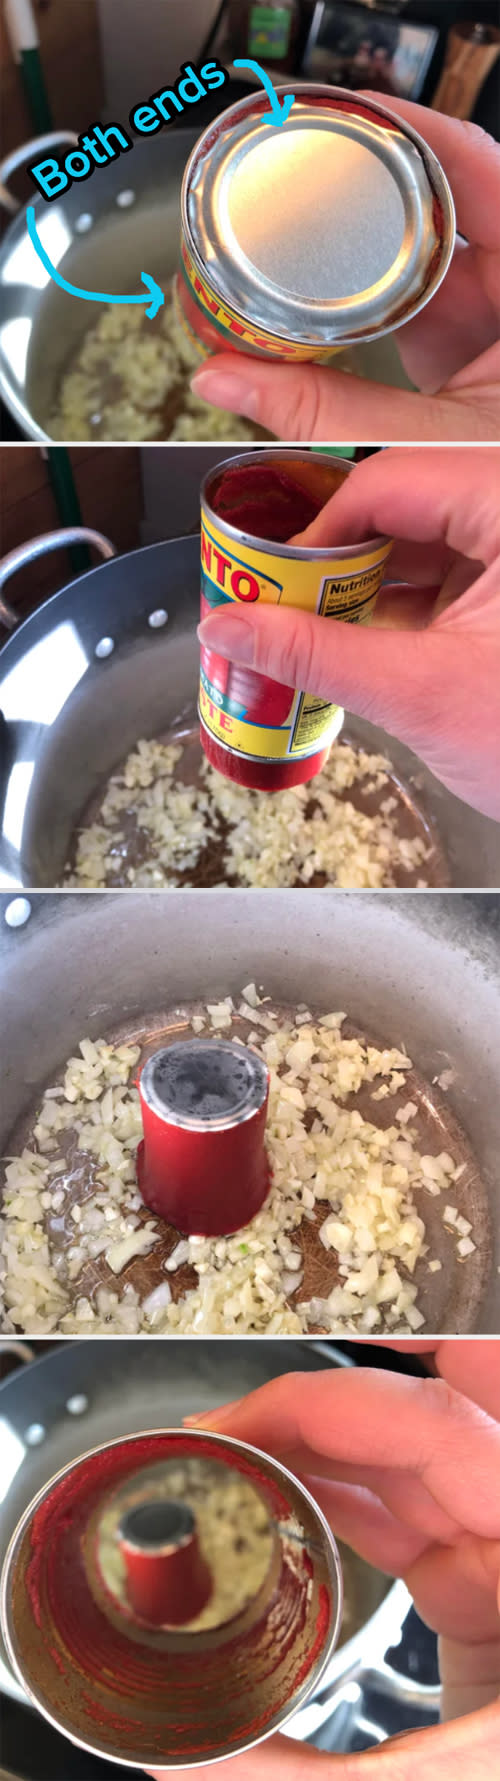 30 People Are Sharing Their Most Life-Changing Cooking Hacks, And They  Might Actually Surprise You